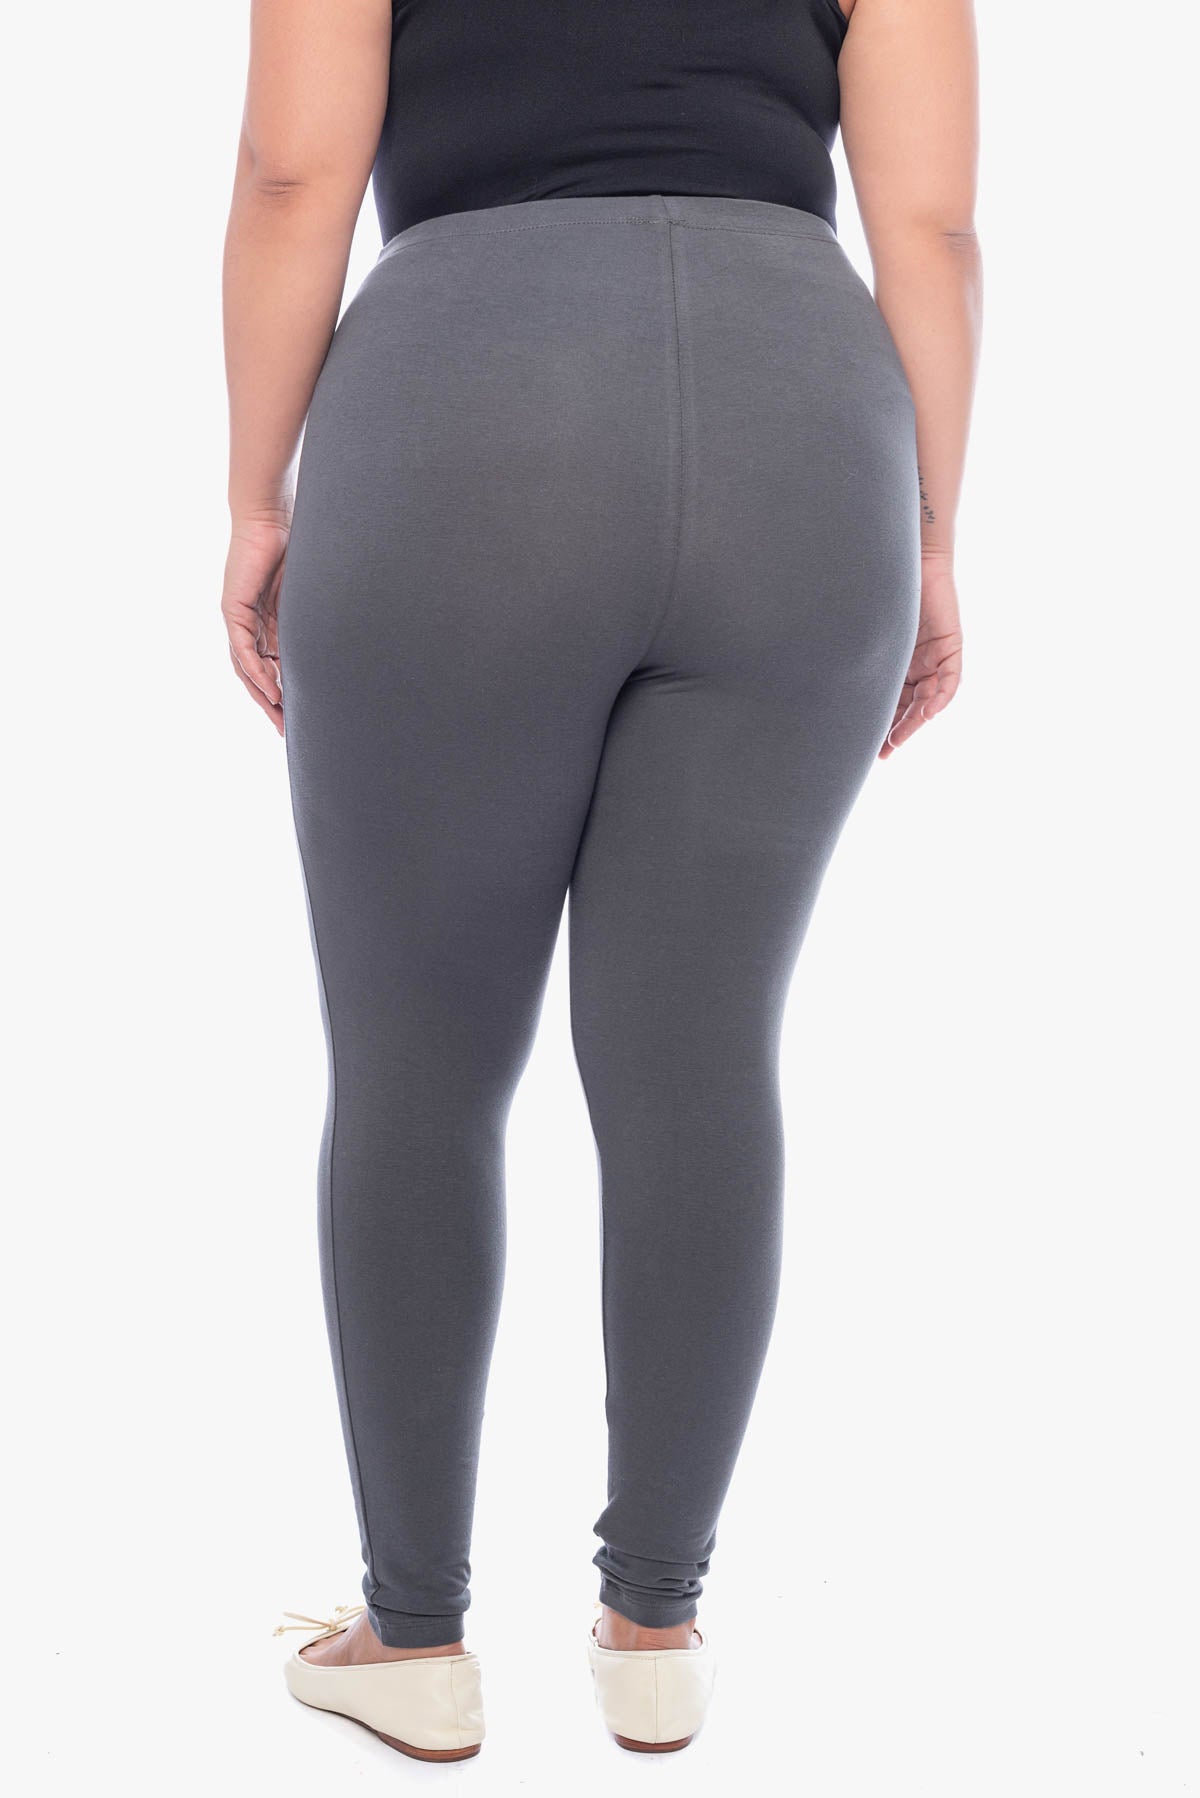 Ansley Luxe Cotton Leggings with Pockets PLUS  Leggings are not pants, Cotton  leggings, High waisted yoga leggings